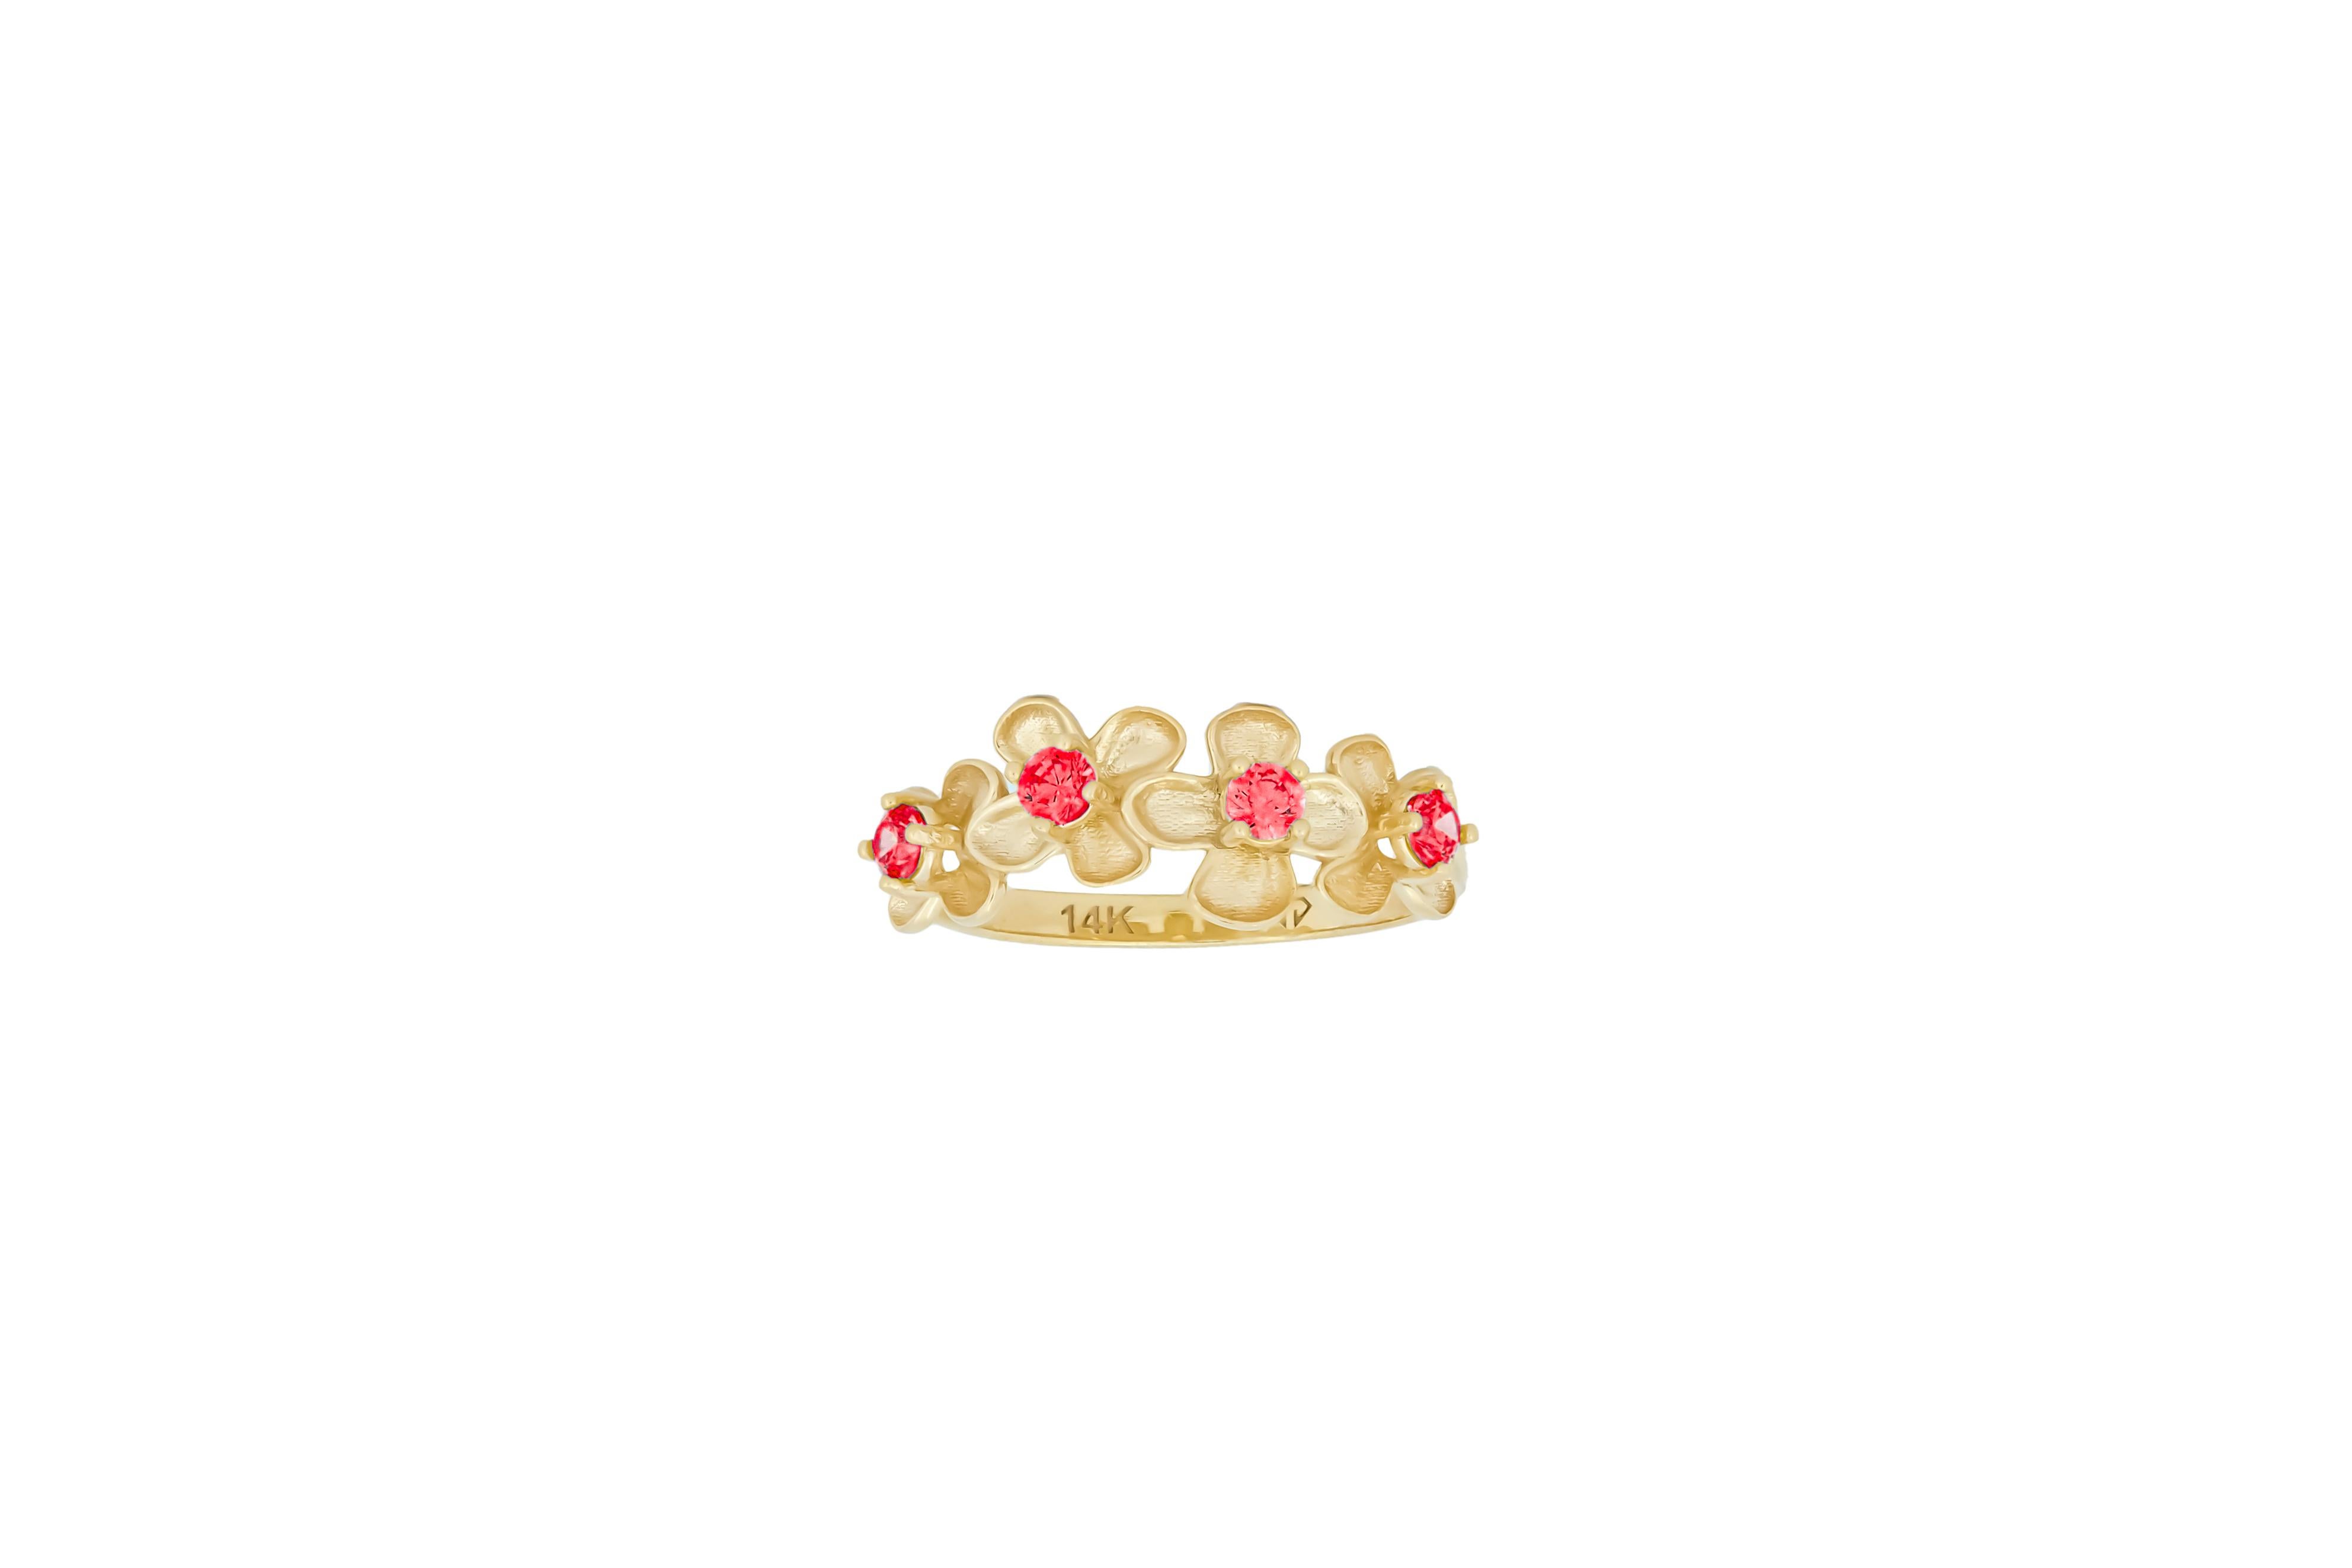 Flower 14k gold ring
Lab Pink ruby 14k gold ring. Daisy flower gold ring. Flower bouquet ring. Pink  gemstone ring.

Metal: 14k solid gold
Weight: 2 gr depends from size

Gemstones:
Set with lab ruby
Color - pink, 
Cut: round

In our shop you can